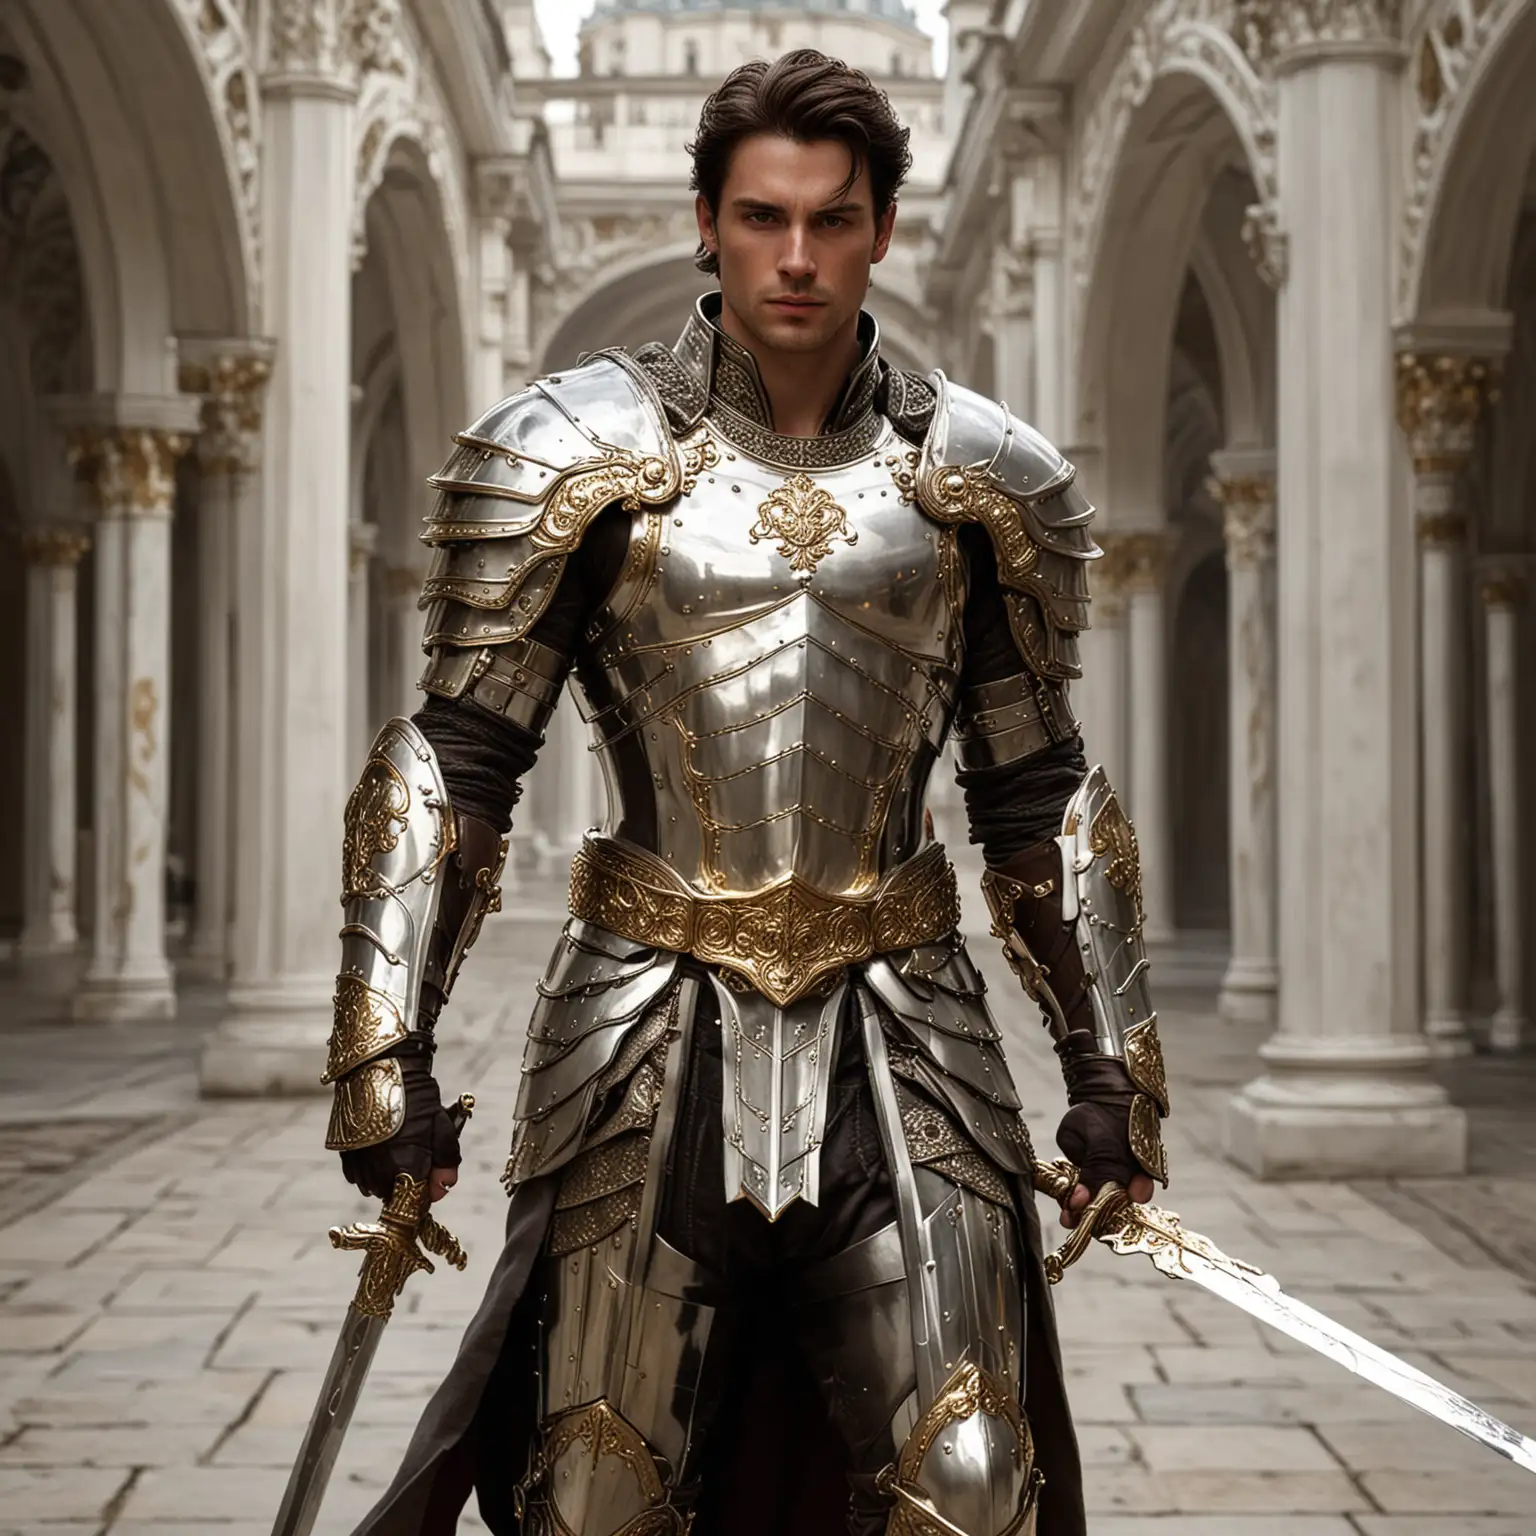 Royal Prince in White and Gold Armor with Sword